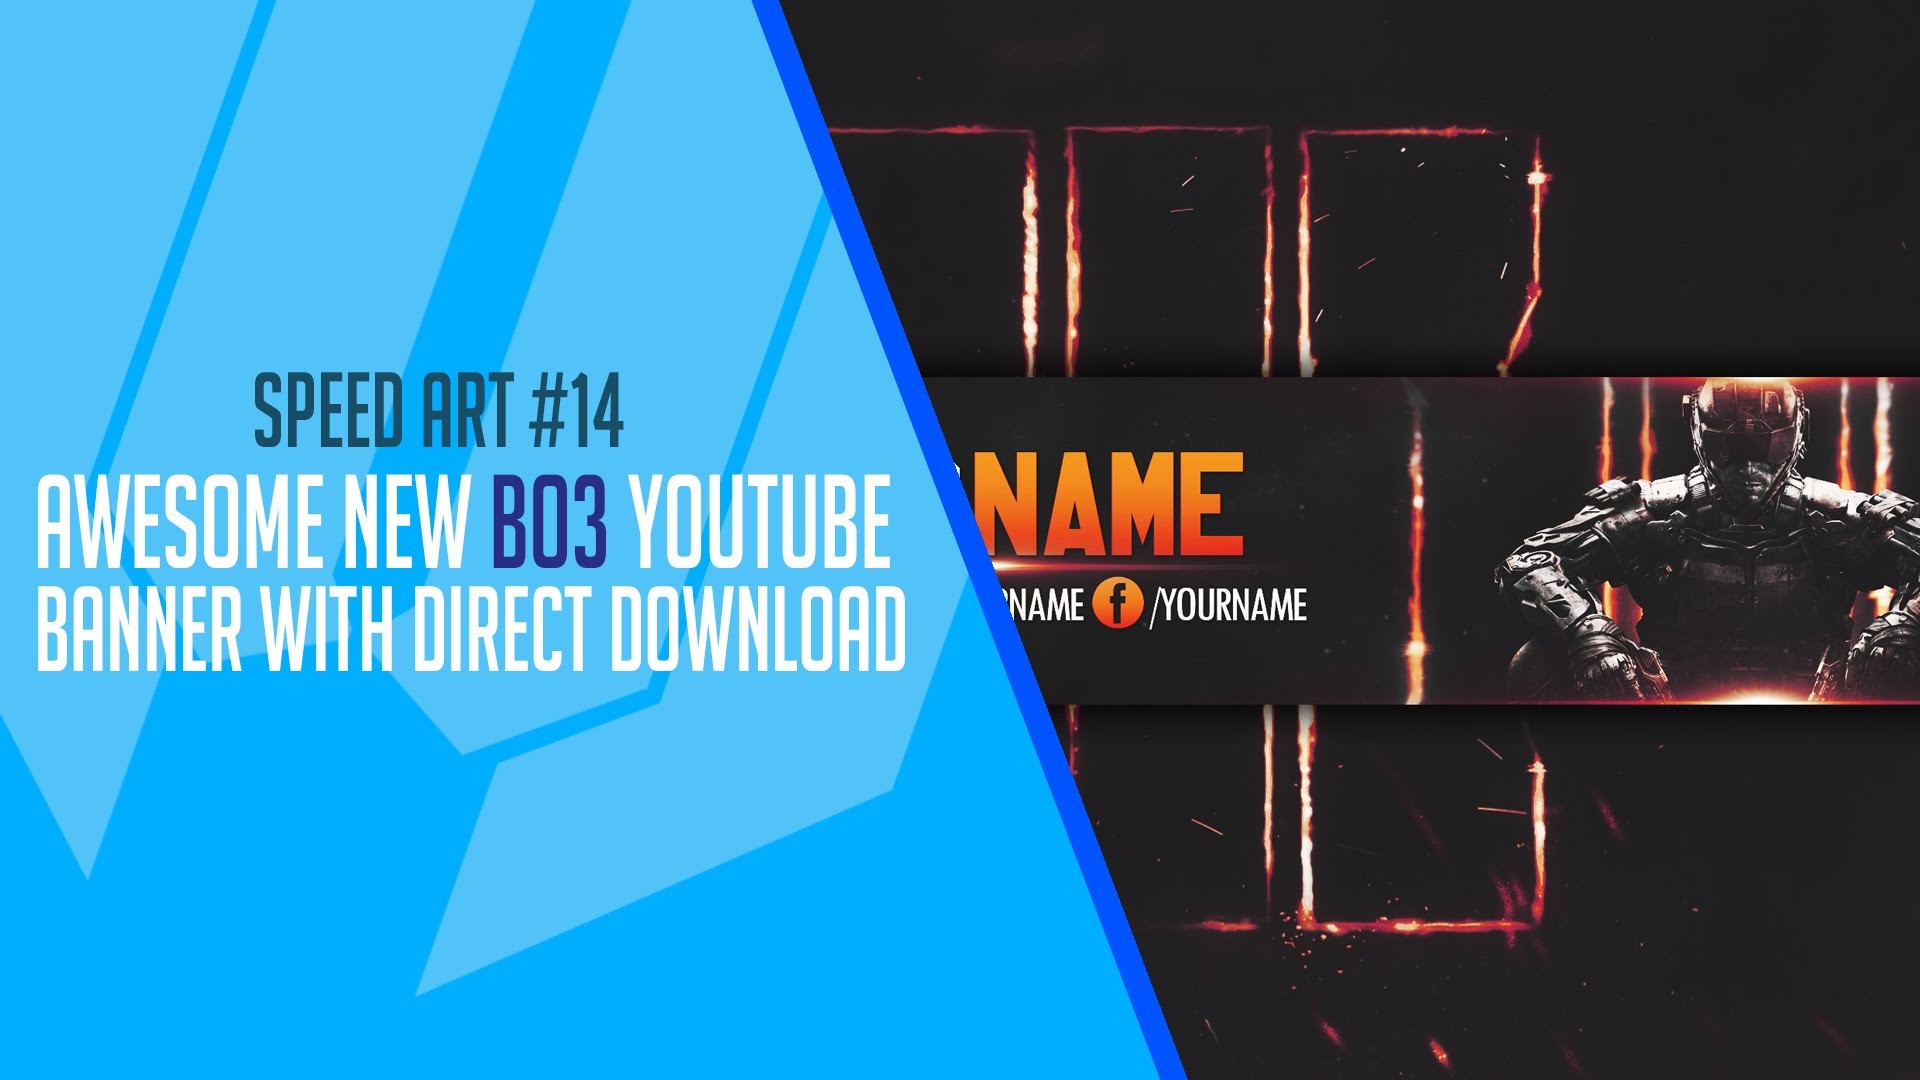 1920x1080 How To Make A BO3 Youtube Banner/Channel Art (Free Template)(Speed Art) -  YouTube